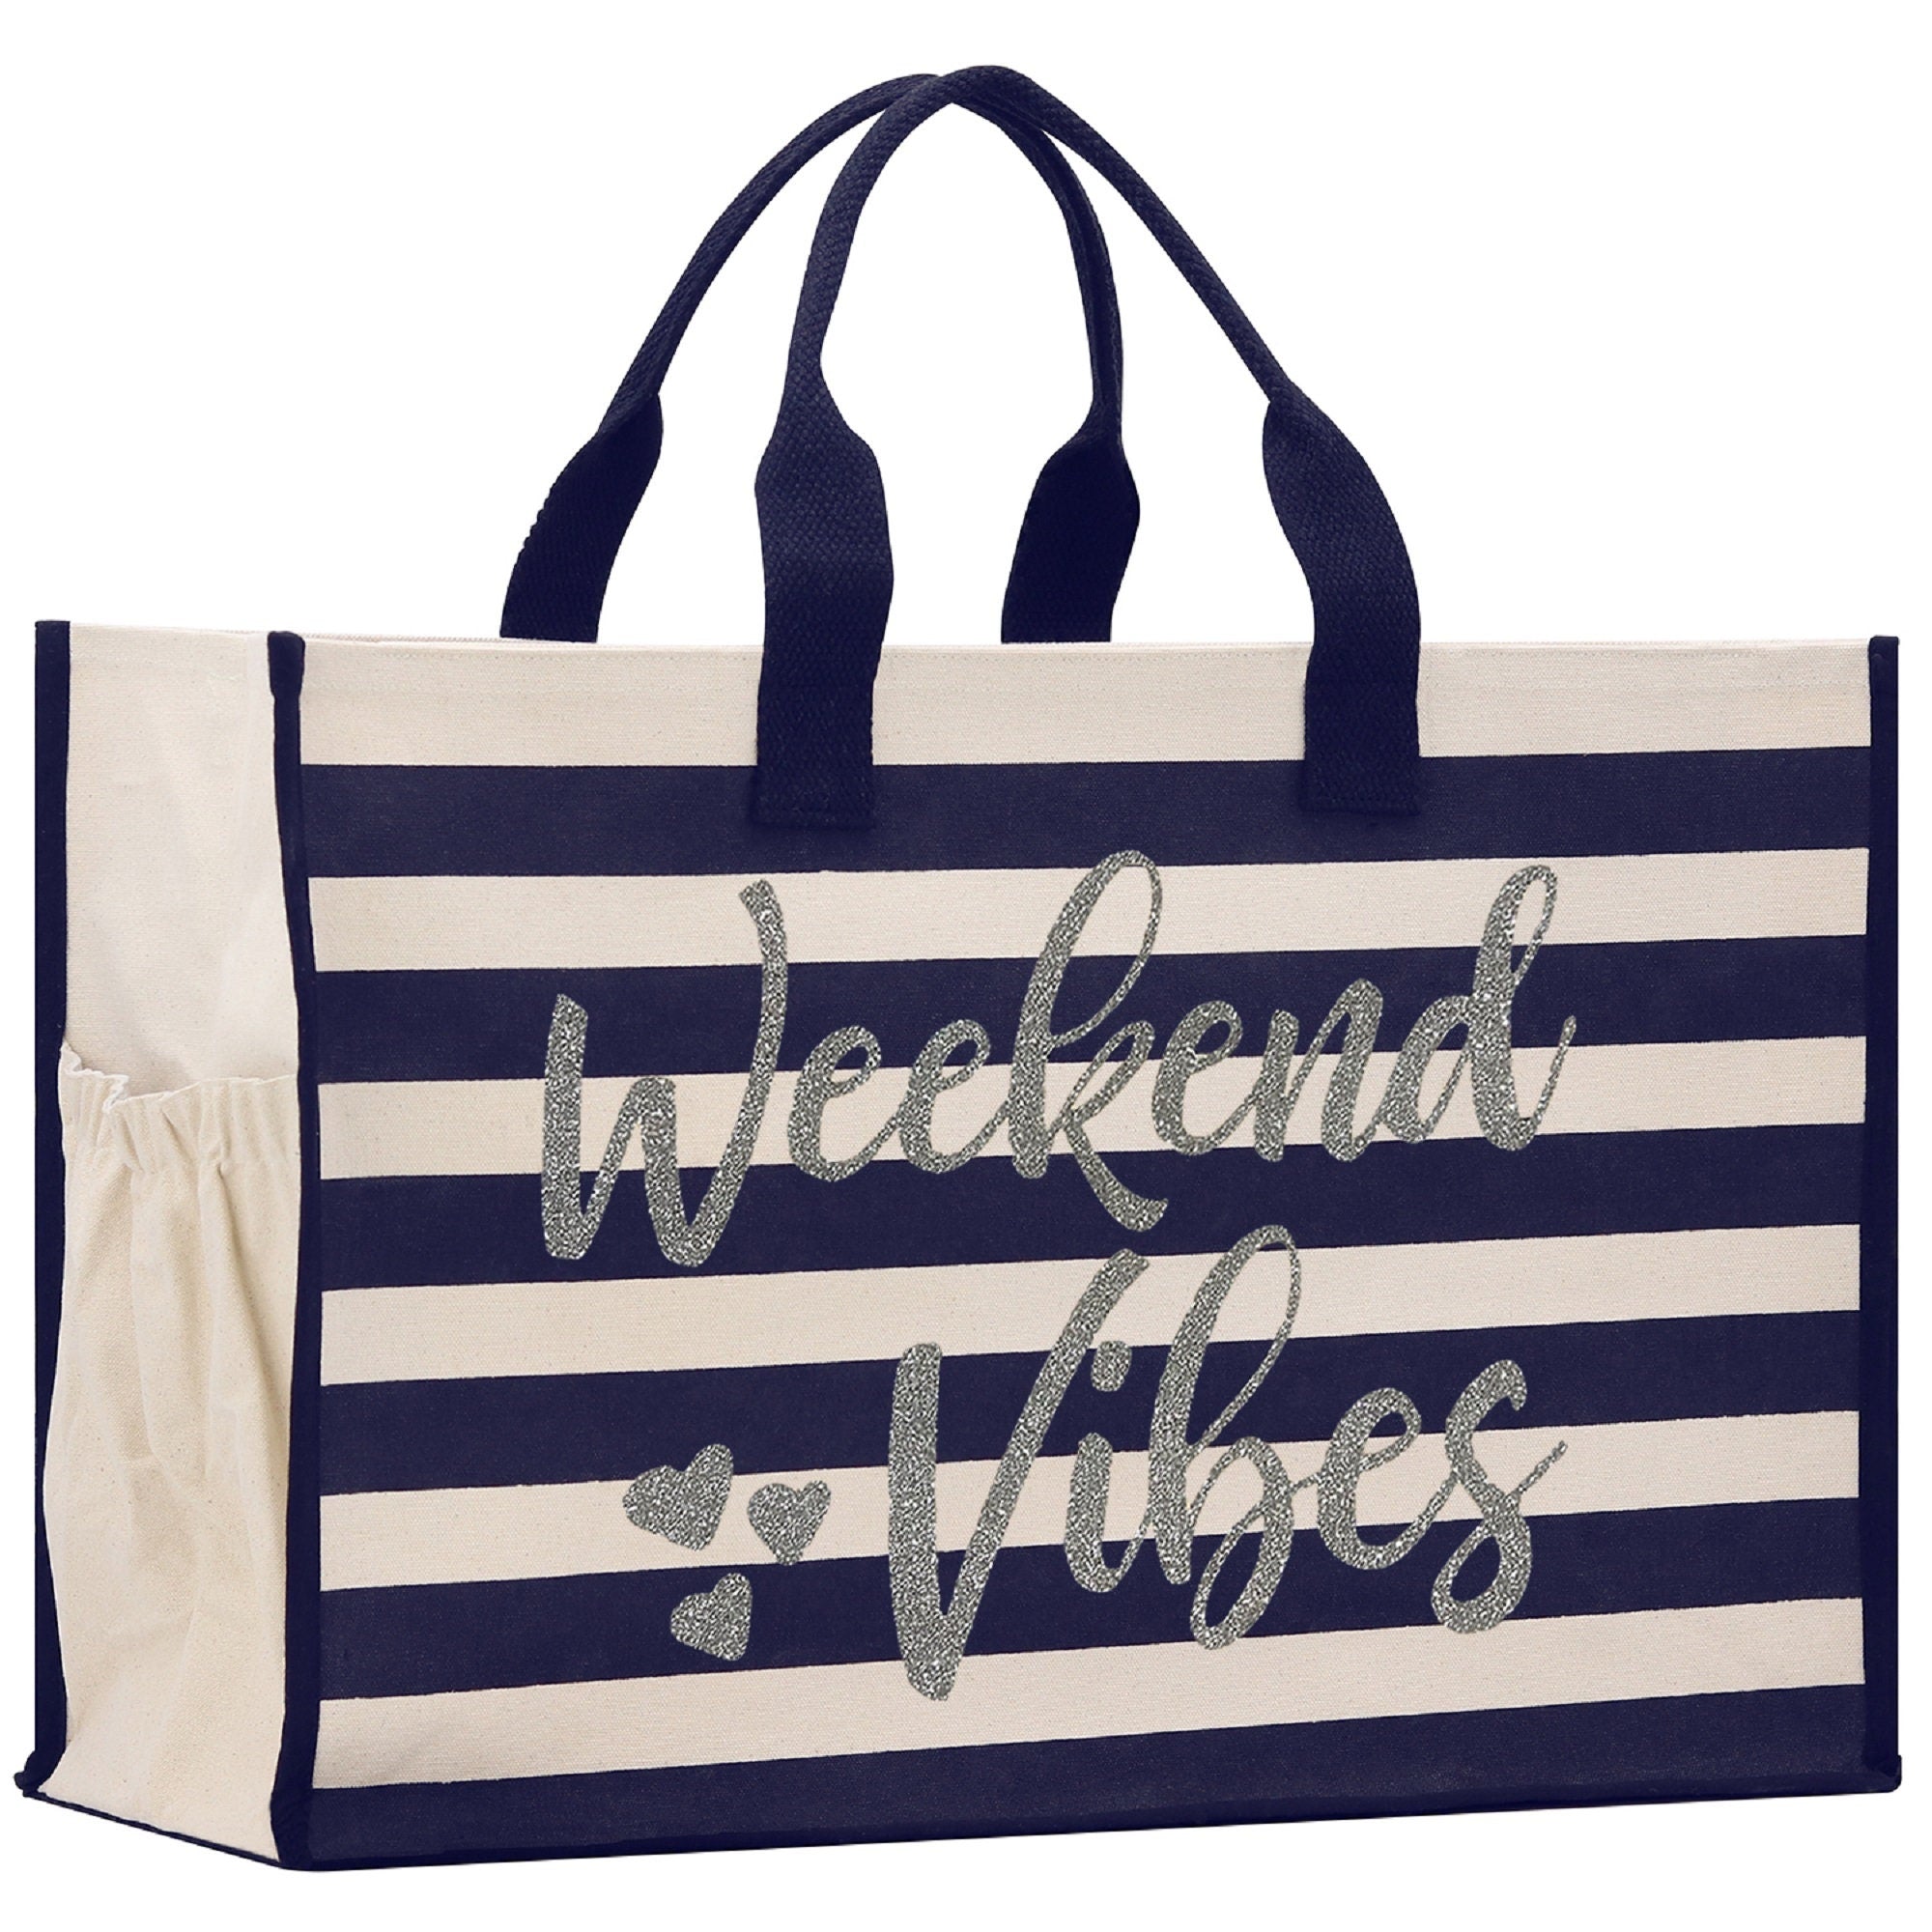 Weekend Vibes Cabana Tote Bag XL - Oversized Chic Tote Bag with Zipper and Inner Pocket - Beach Bag for Women - Weekender Beach Tote